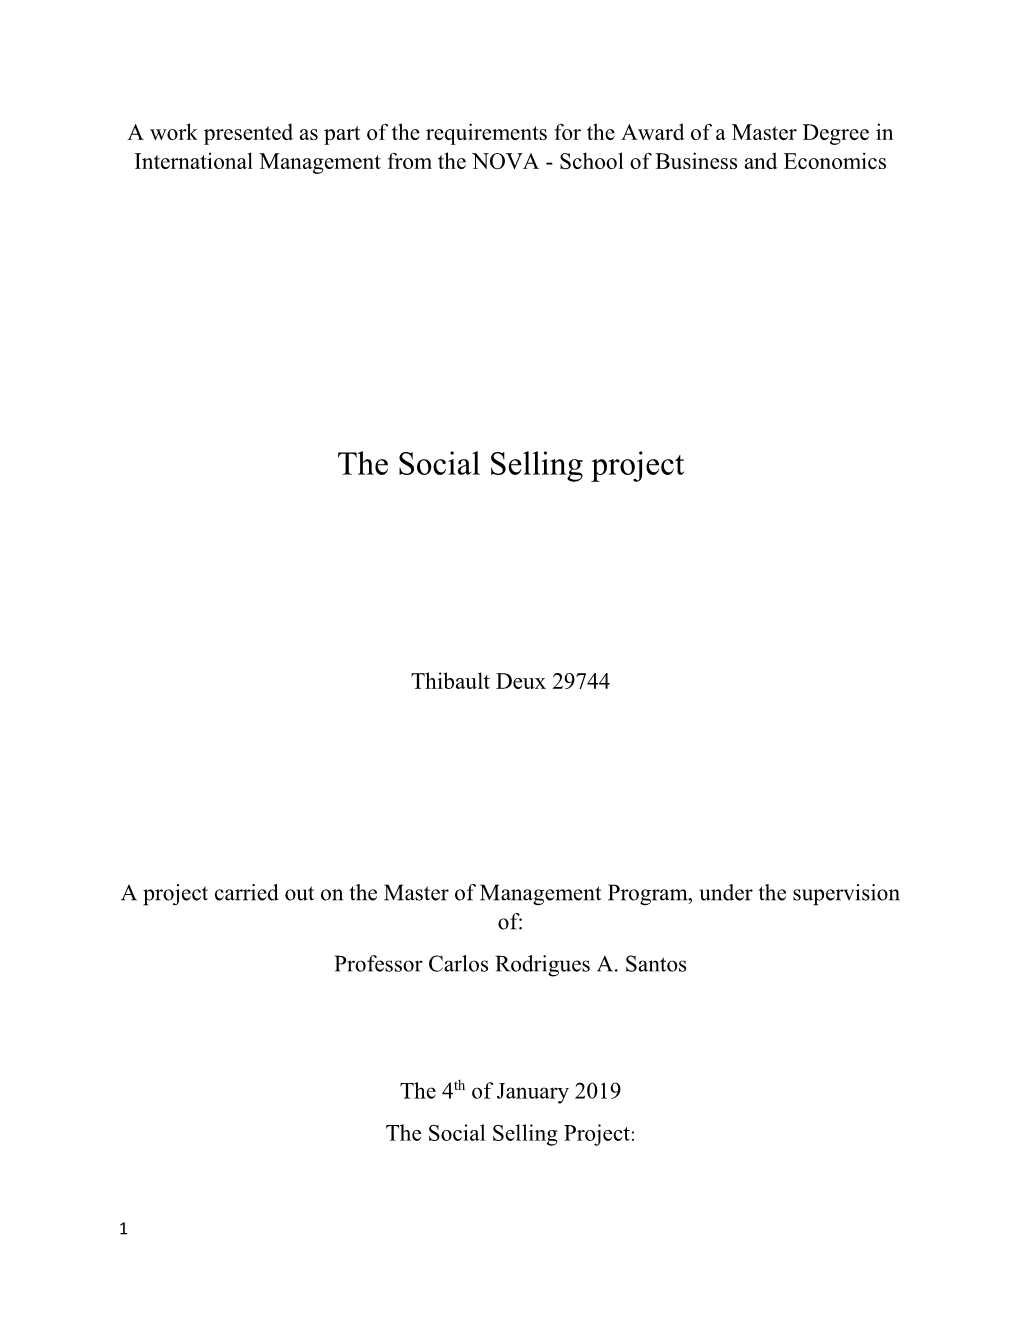 The Social Selling Project